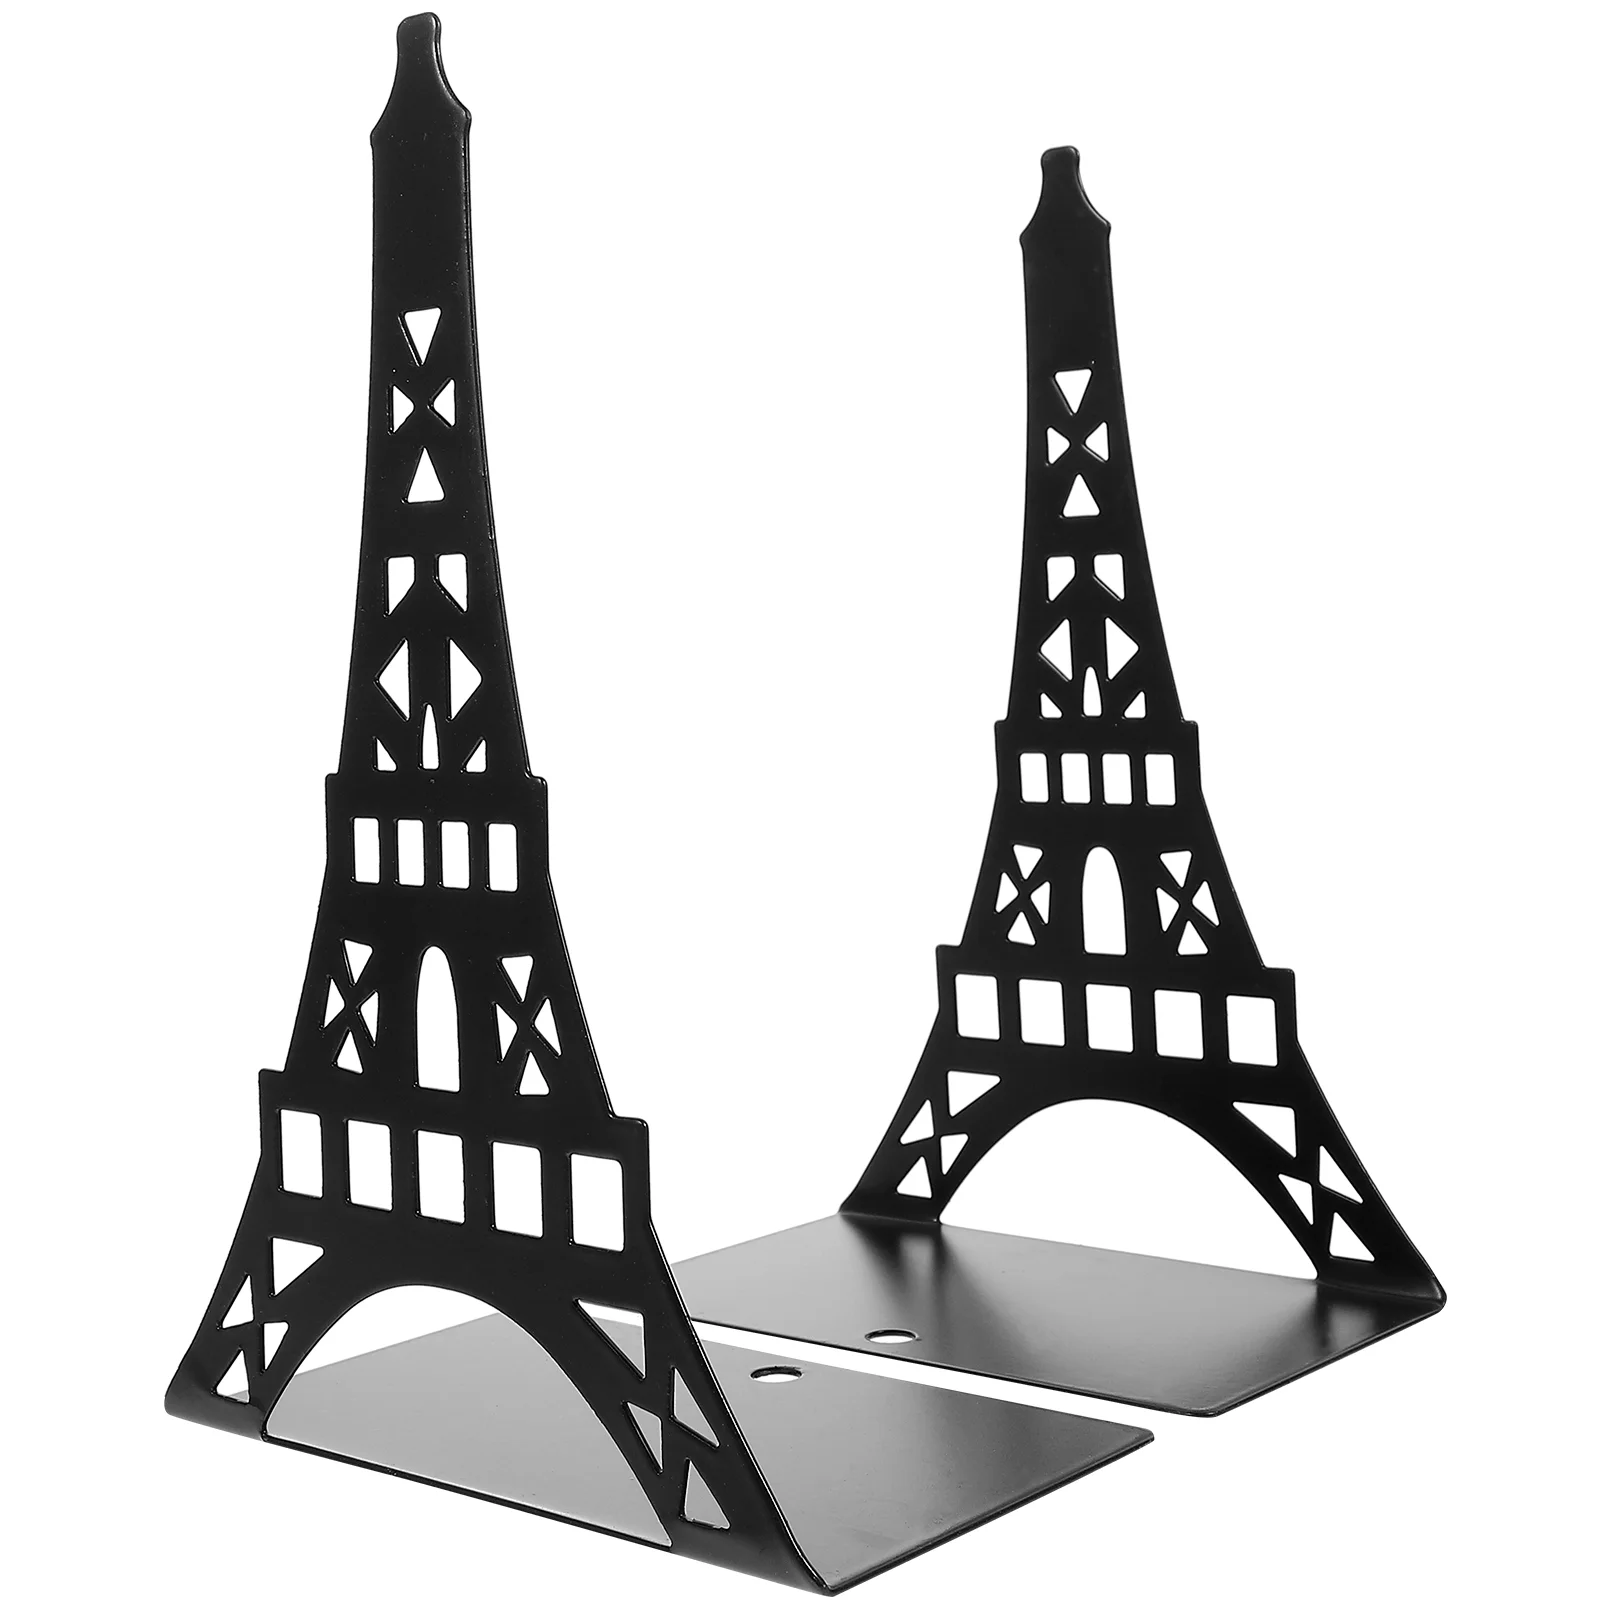 

Book Ends Book End Metal Bookend Creative Paris Eiffel Tower Bookends Black White Book Holder Bool Organizer Home Office